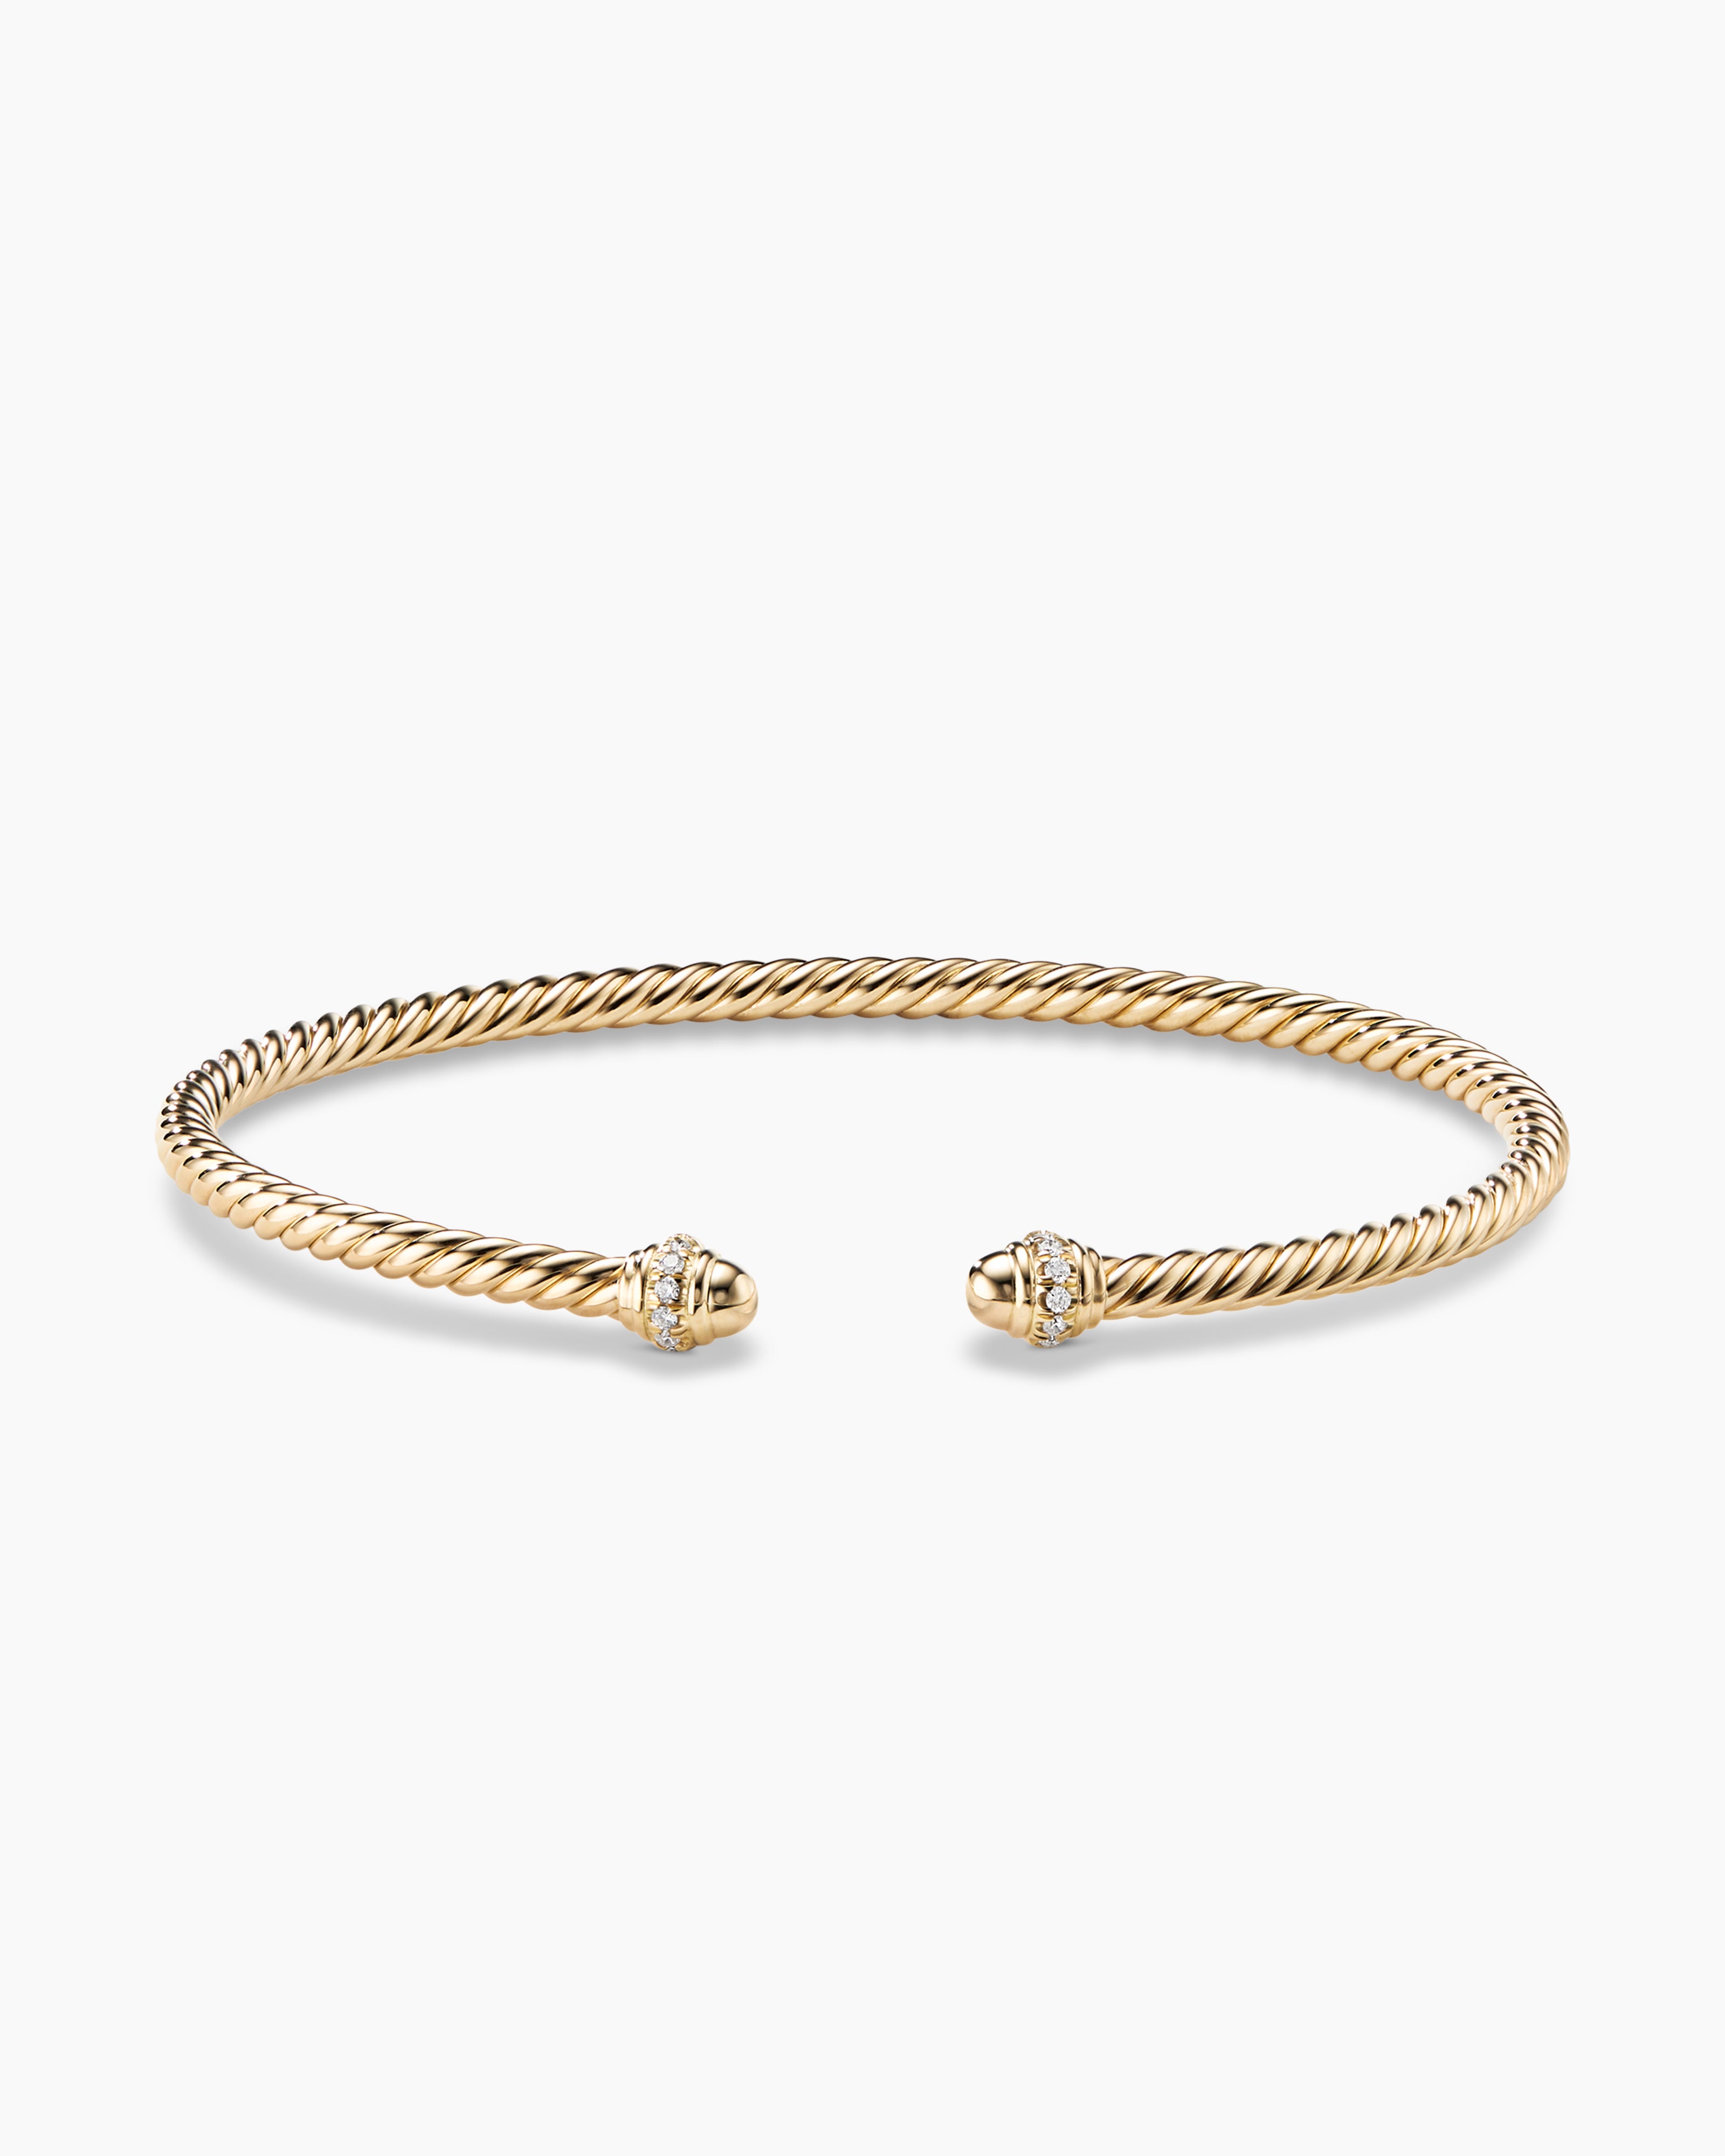 Classic Cablespira Bracelet in 18K Yellow Gold with Diamonds, 3mm ...